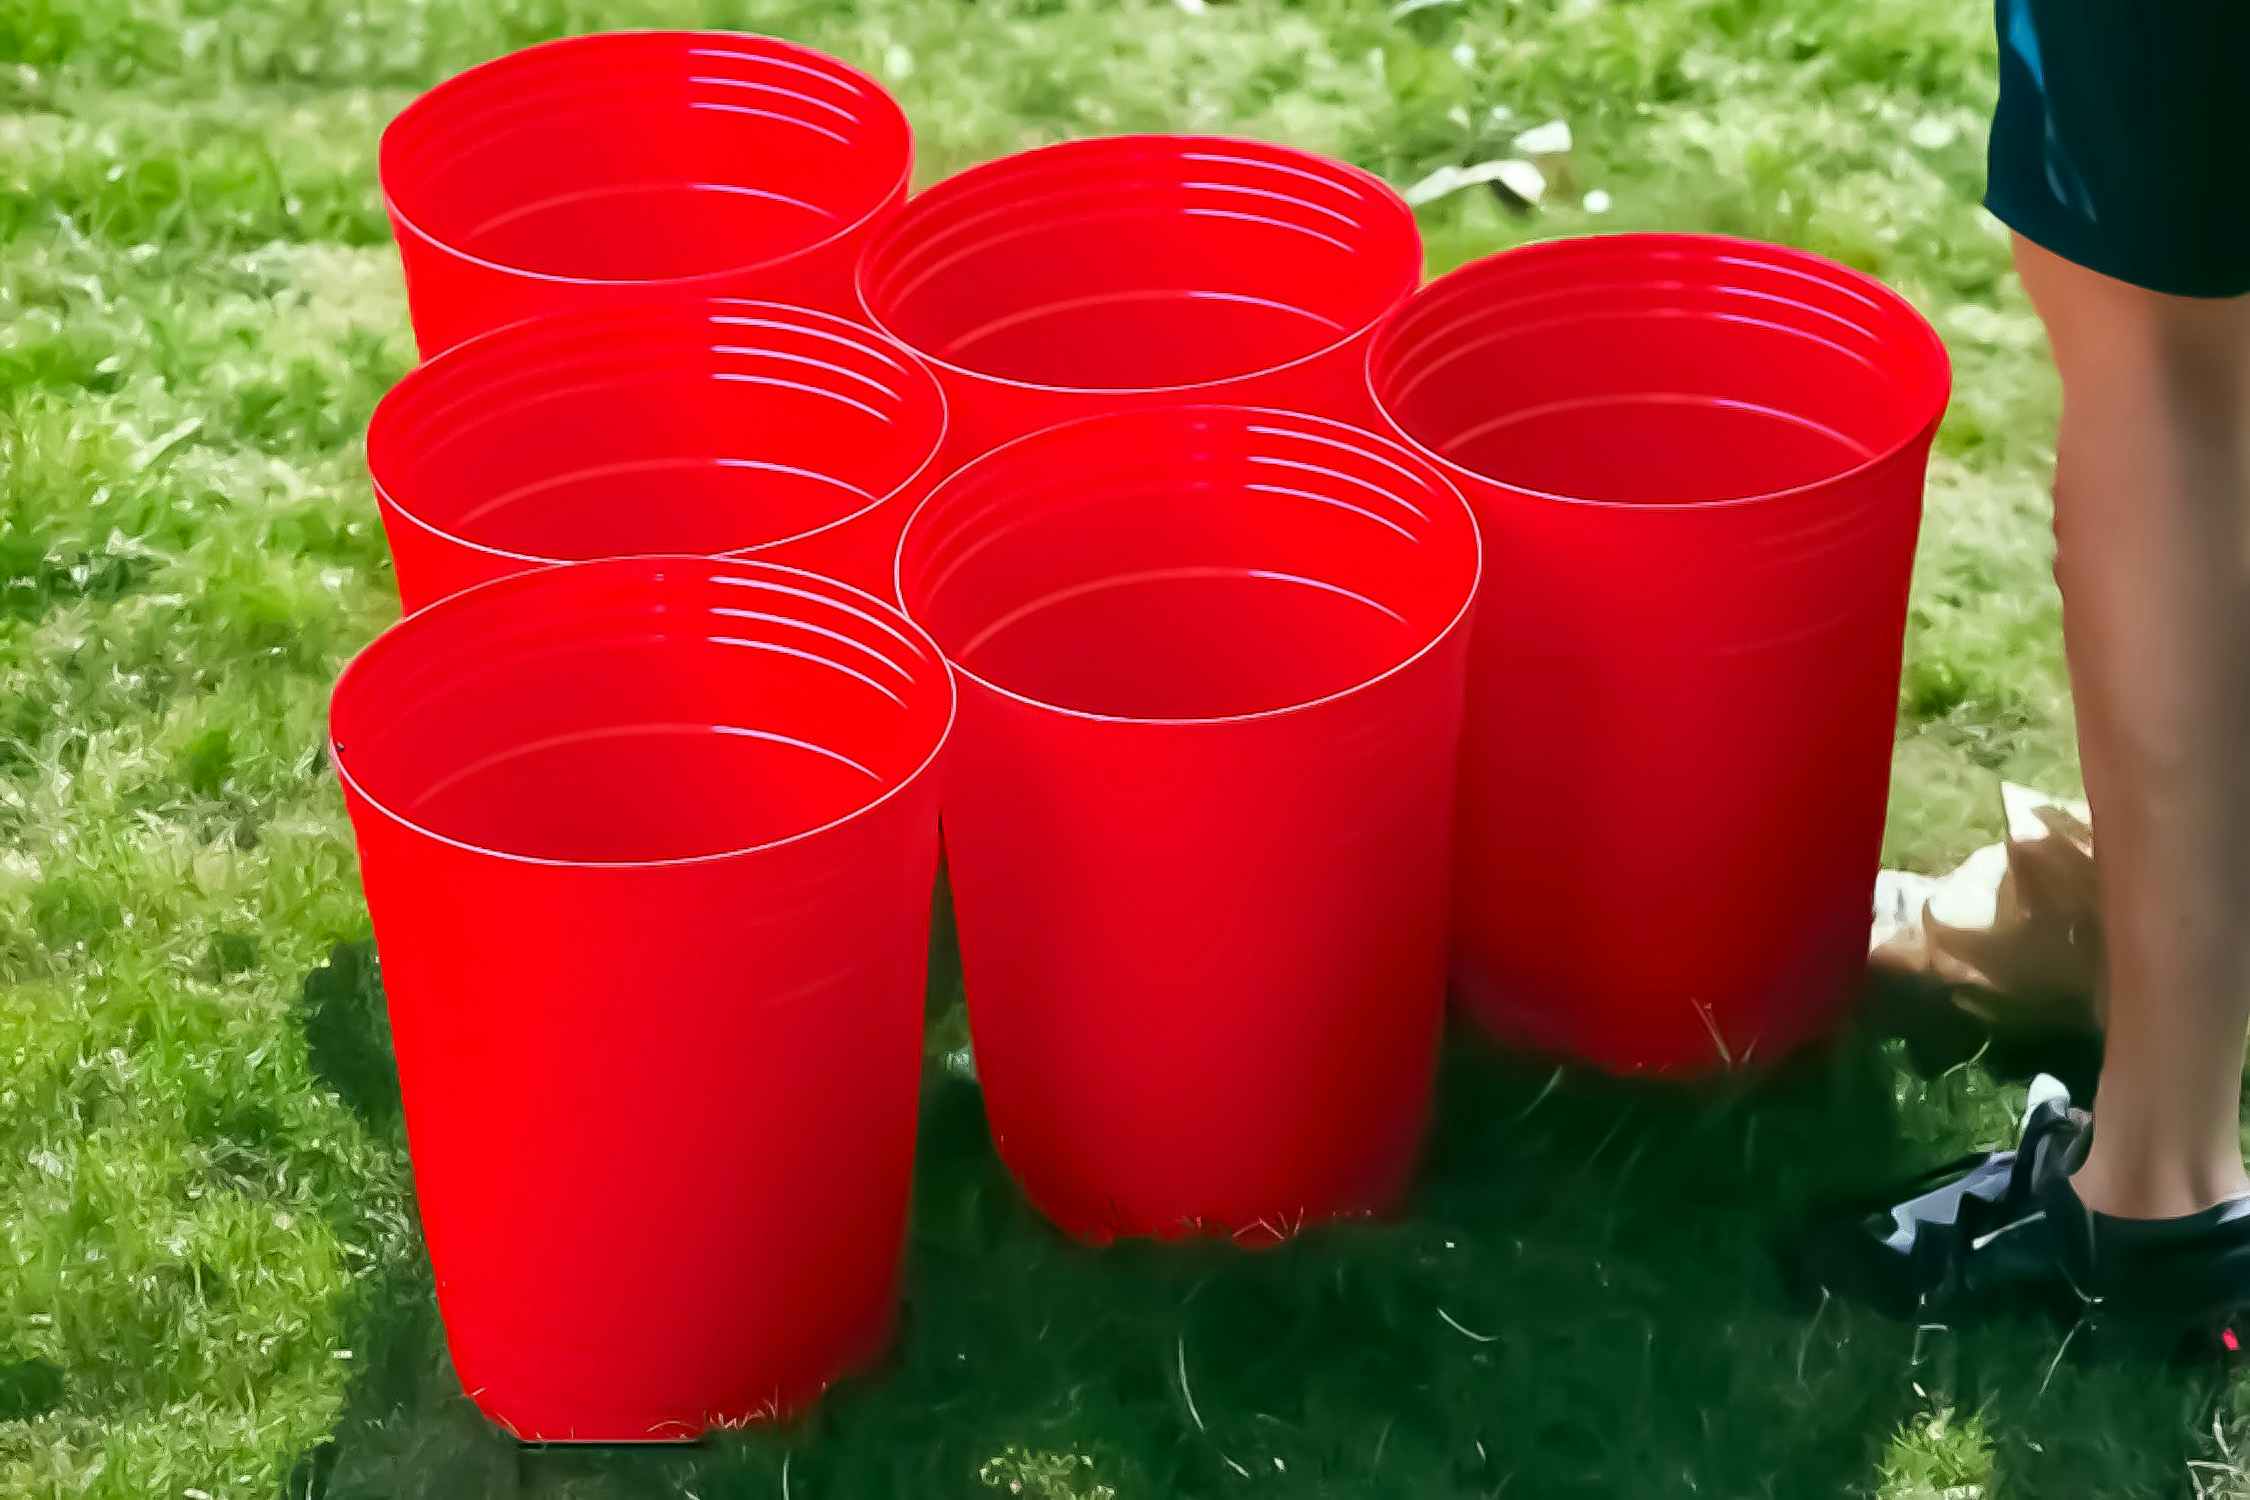 Score a 6-Pack of Red Cup Trash Cans for Only $4.56 at Walmart